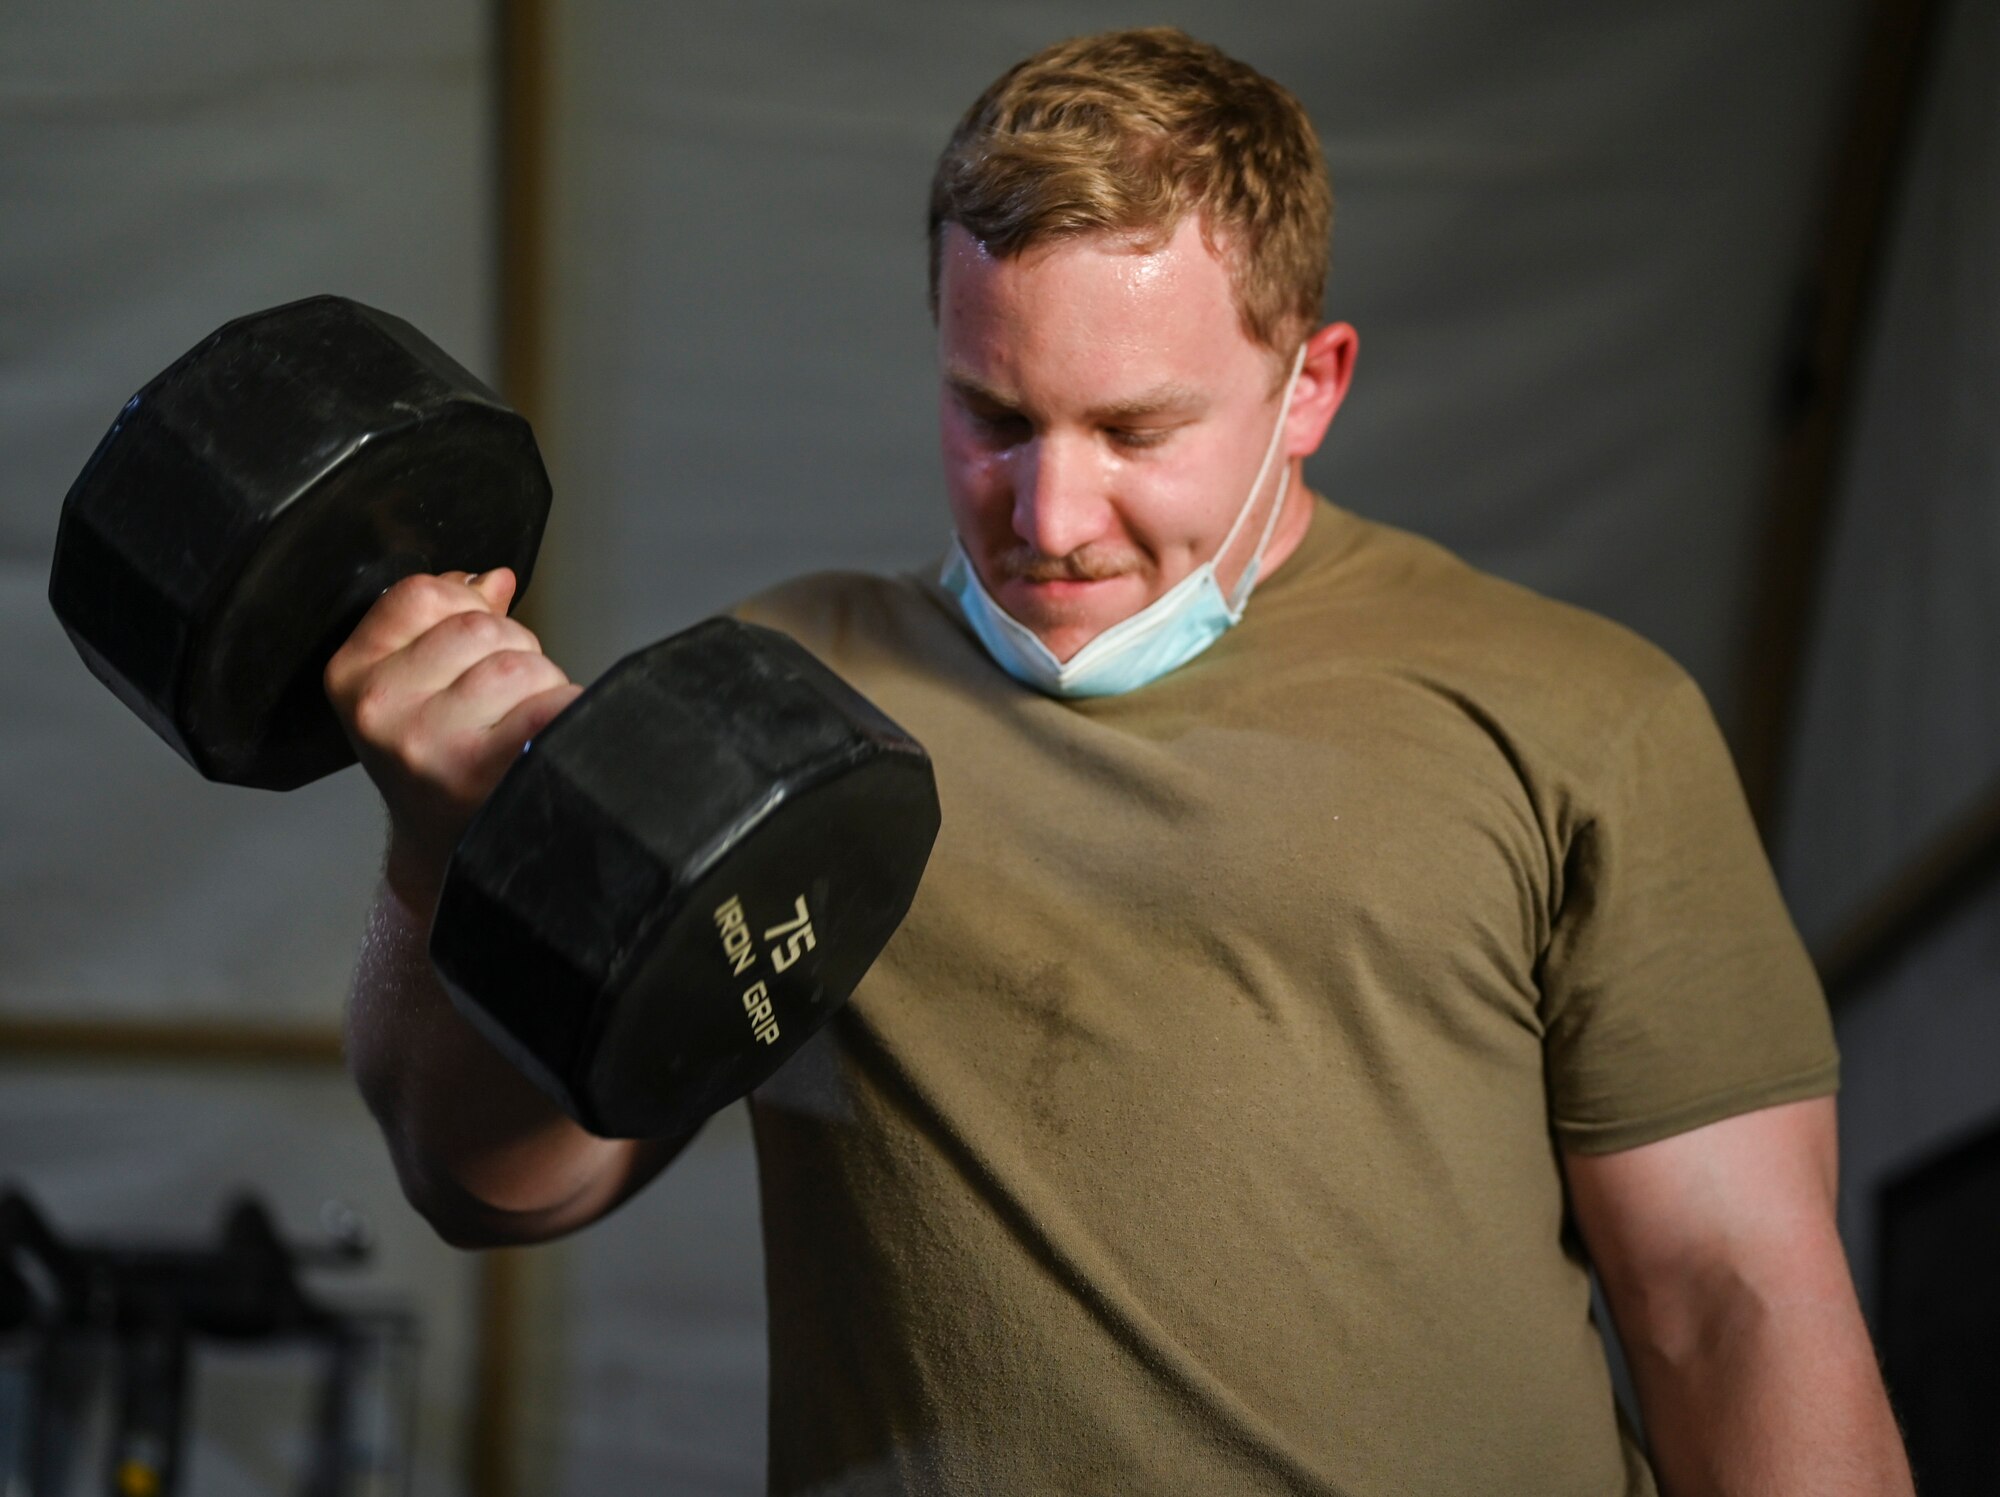 A photo of an Airman lifting weights.